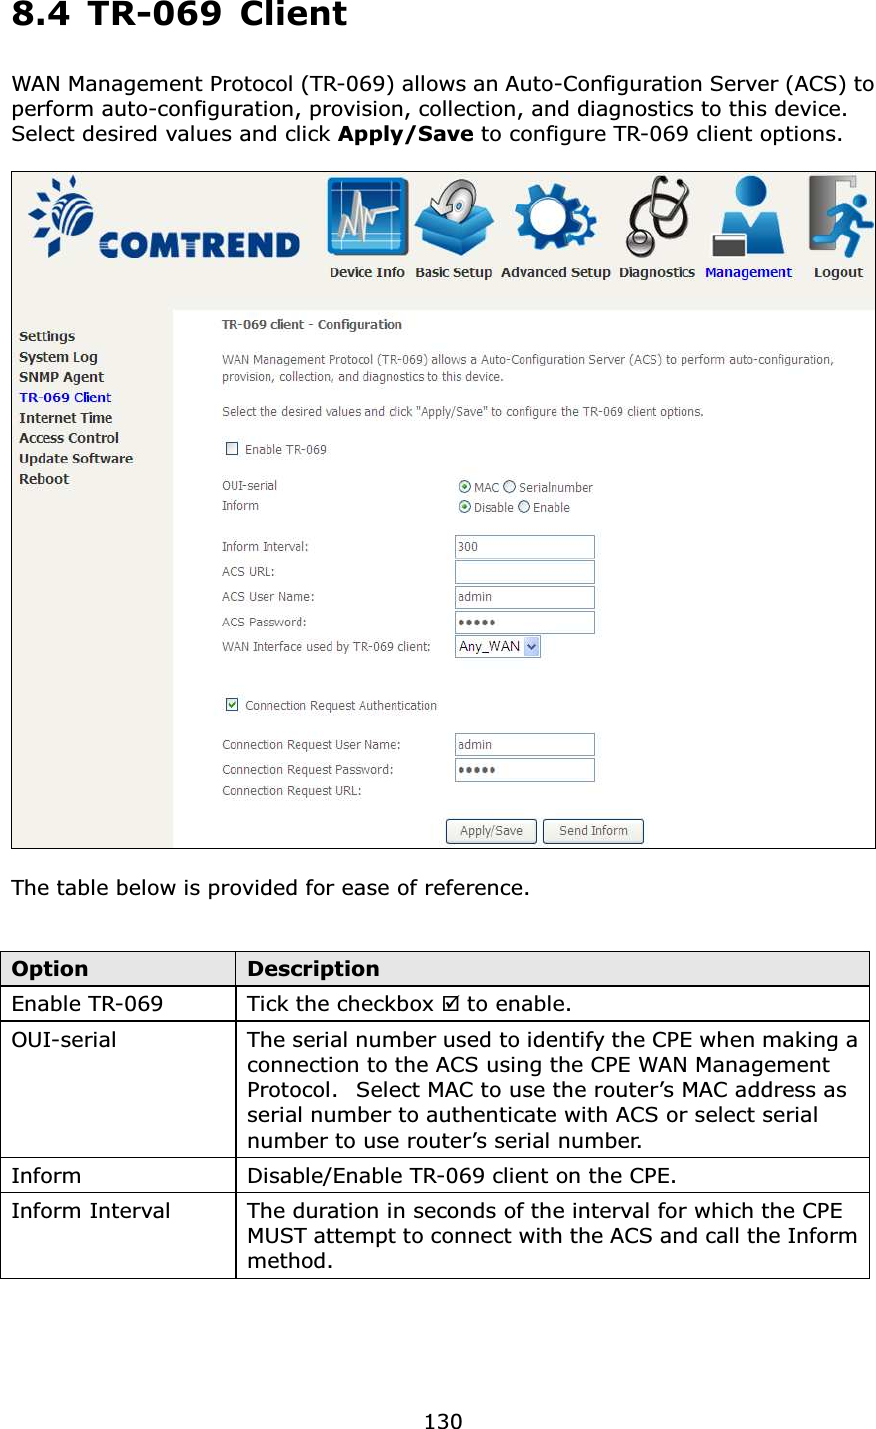  1308.4 TR-069 Client WAN Management Protocol (TR-069) allows an Auto-Configuration Server (ACS) to perform auto-configuration, provision, collection, and diagnostics to this device.   Select desired values and click Apply/Save to configure TR-069 client options.    The table below is provided for ease of reference.   Option  Description Enable TR-069  Tick the checkbox  to enable. OUI-serial  The serial number used to identify the CPE when making a connection to the ACS using the CPE WAN Management Protocol.   Select MAC to use the router’s MAC address as serial number to authenticate with ACS or select serial number to use router’s serial number. Inform  Disable/Enable TR-069 client on the CPE. Inform Interval  The duration in seconds of the interval for which the CPE MUST attempt to connect with the ACS and call the Inform method. 